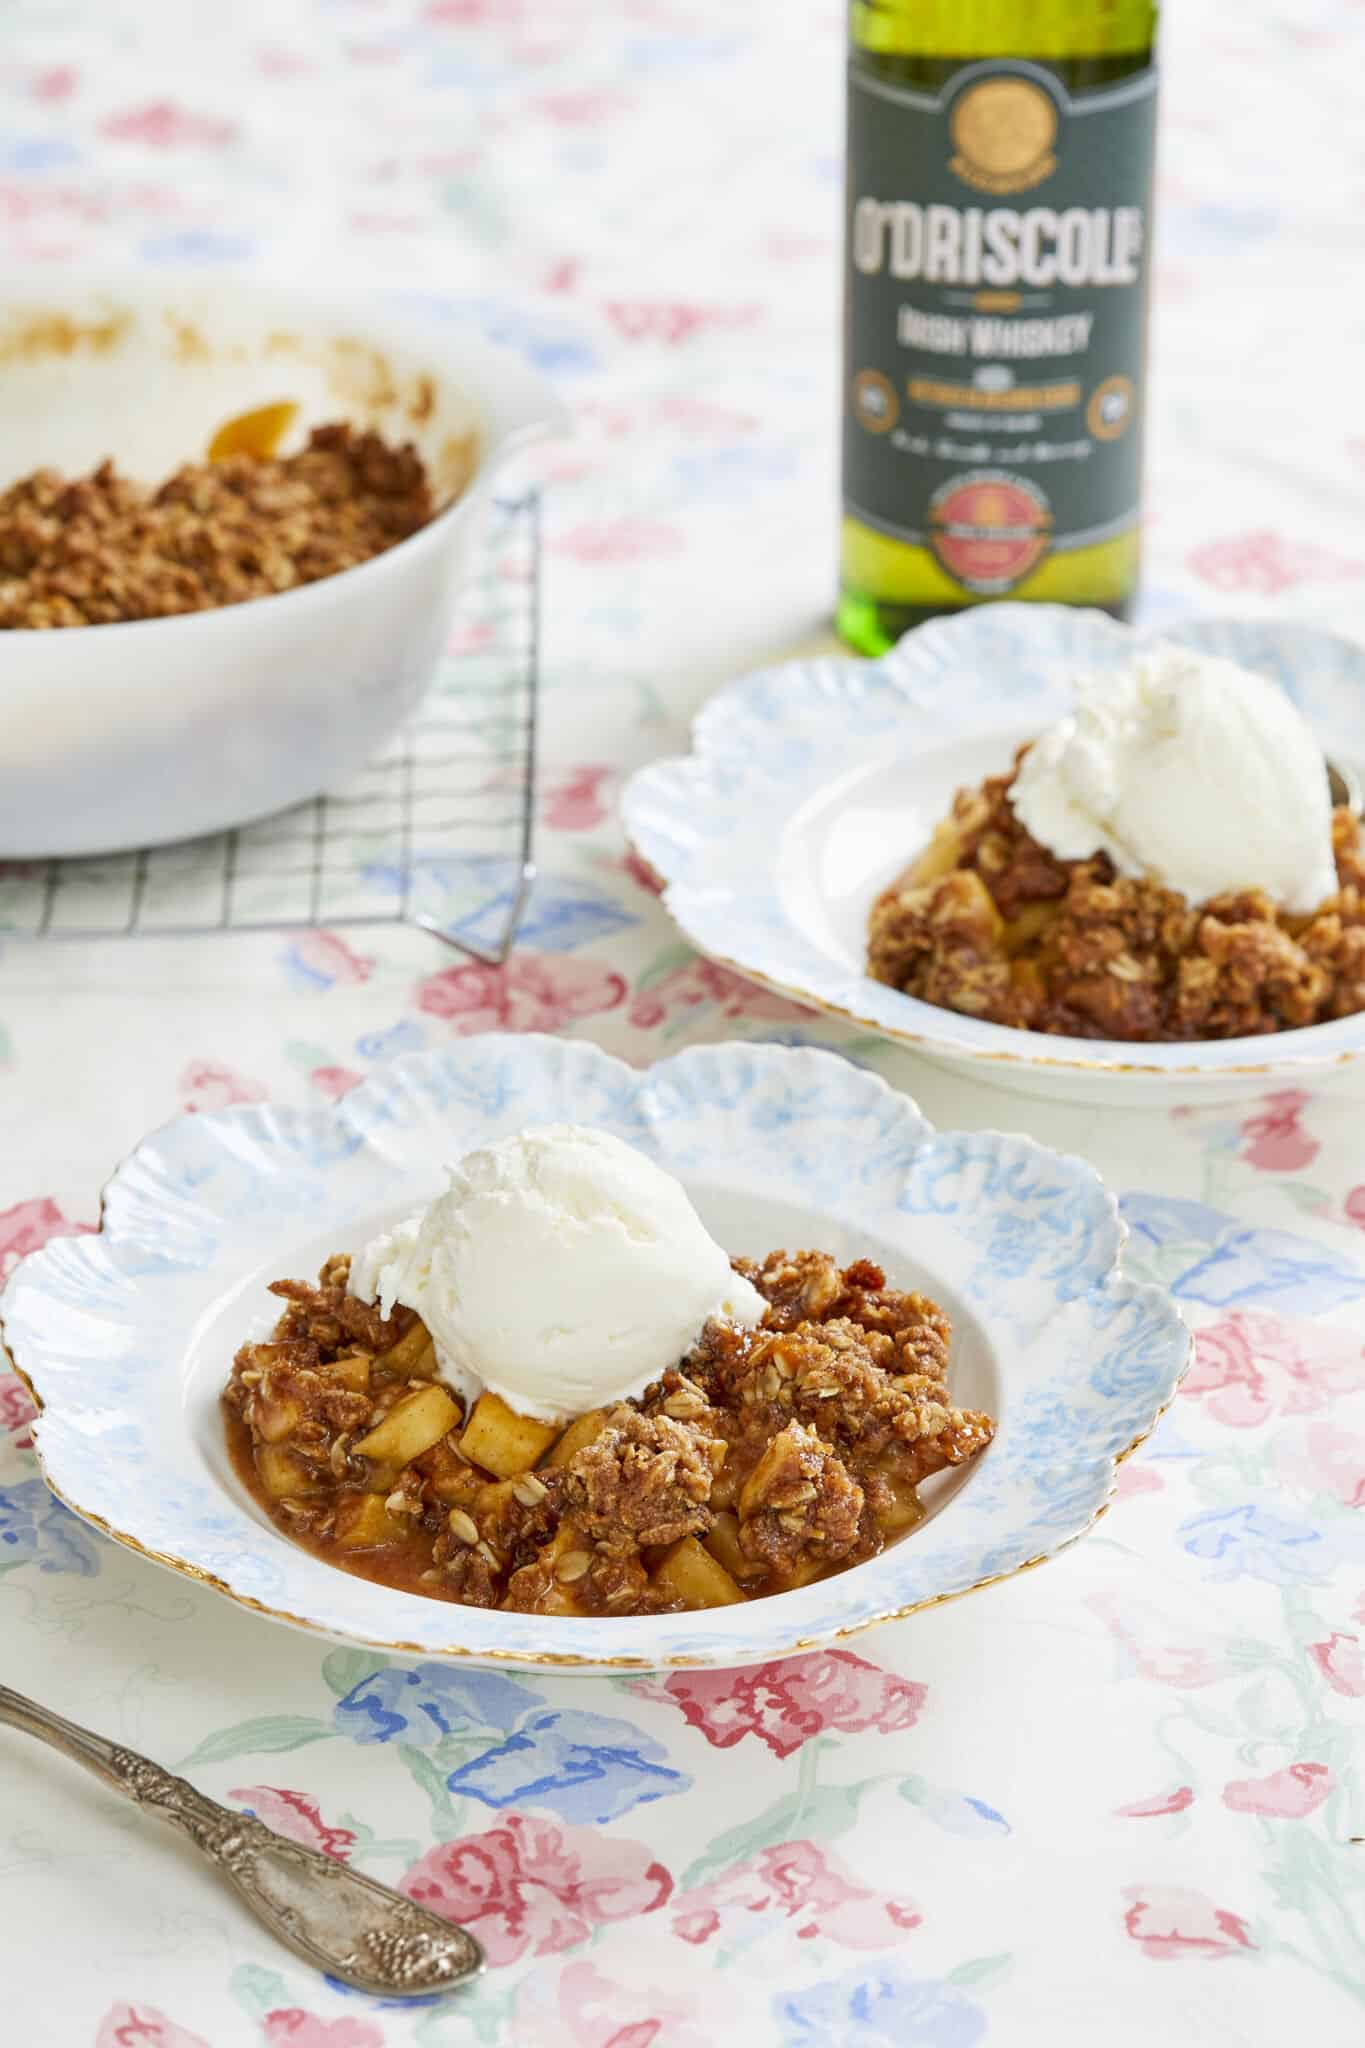 Boozy Whisky Apple Crisp is baked in a milkgalss Pyrex baking dish with sweet, buttery baked apples covered with a cinnamon oatmeal-cinnamon crispy top. Two servings are ready in dessert plates with ice cream on top. 